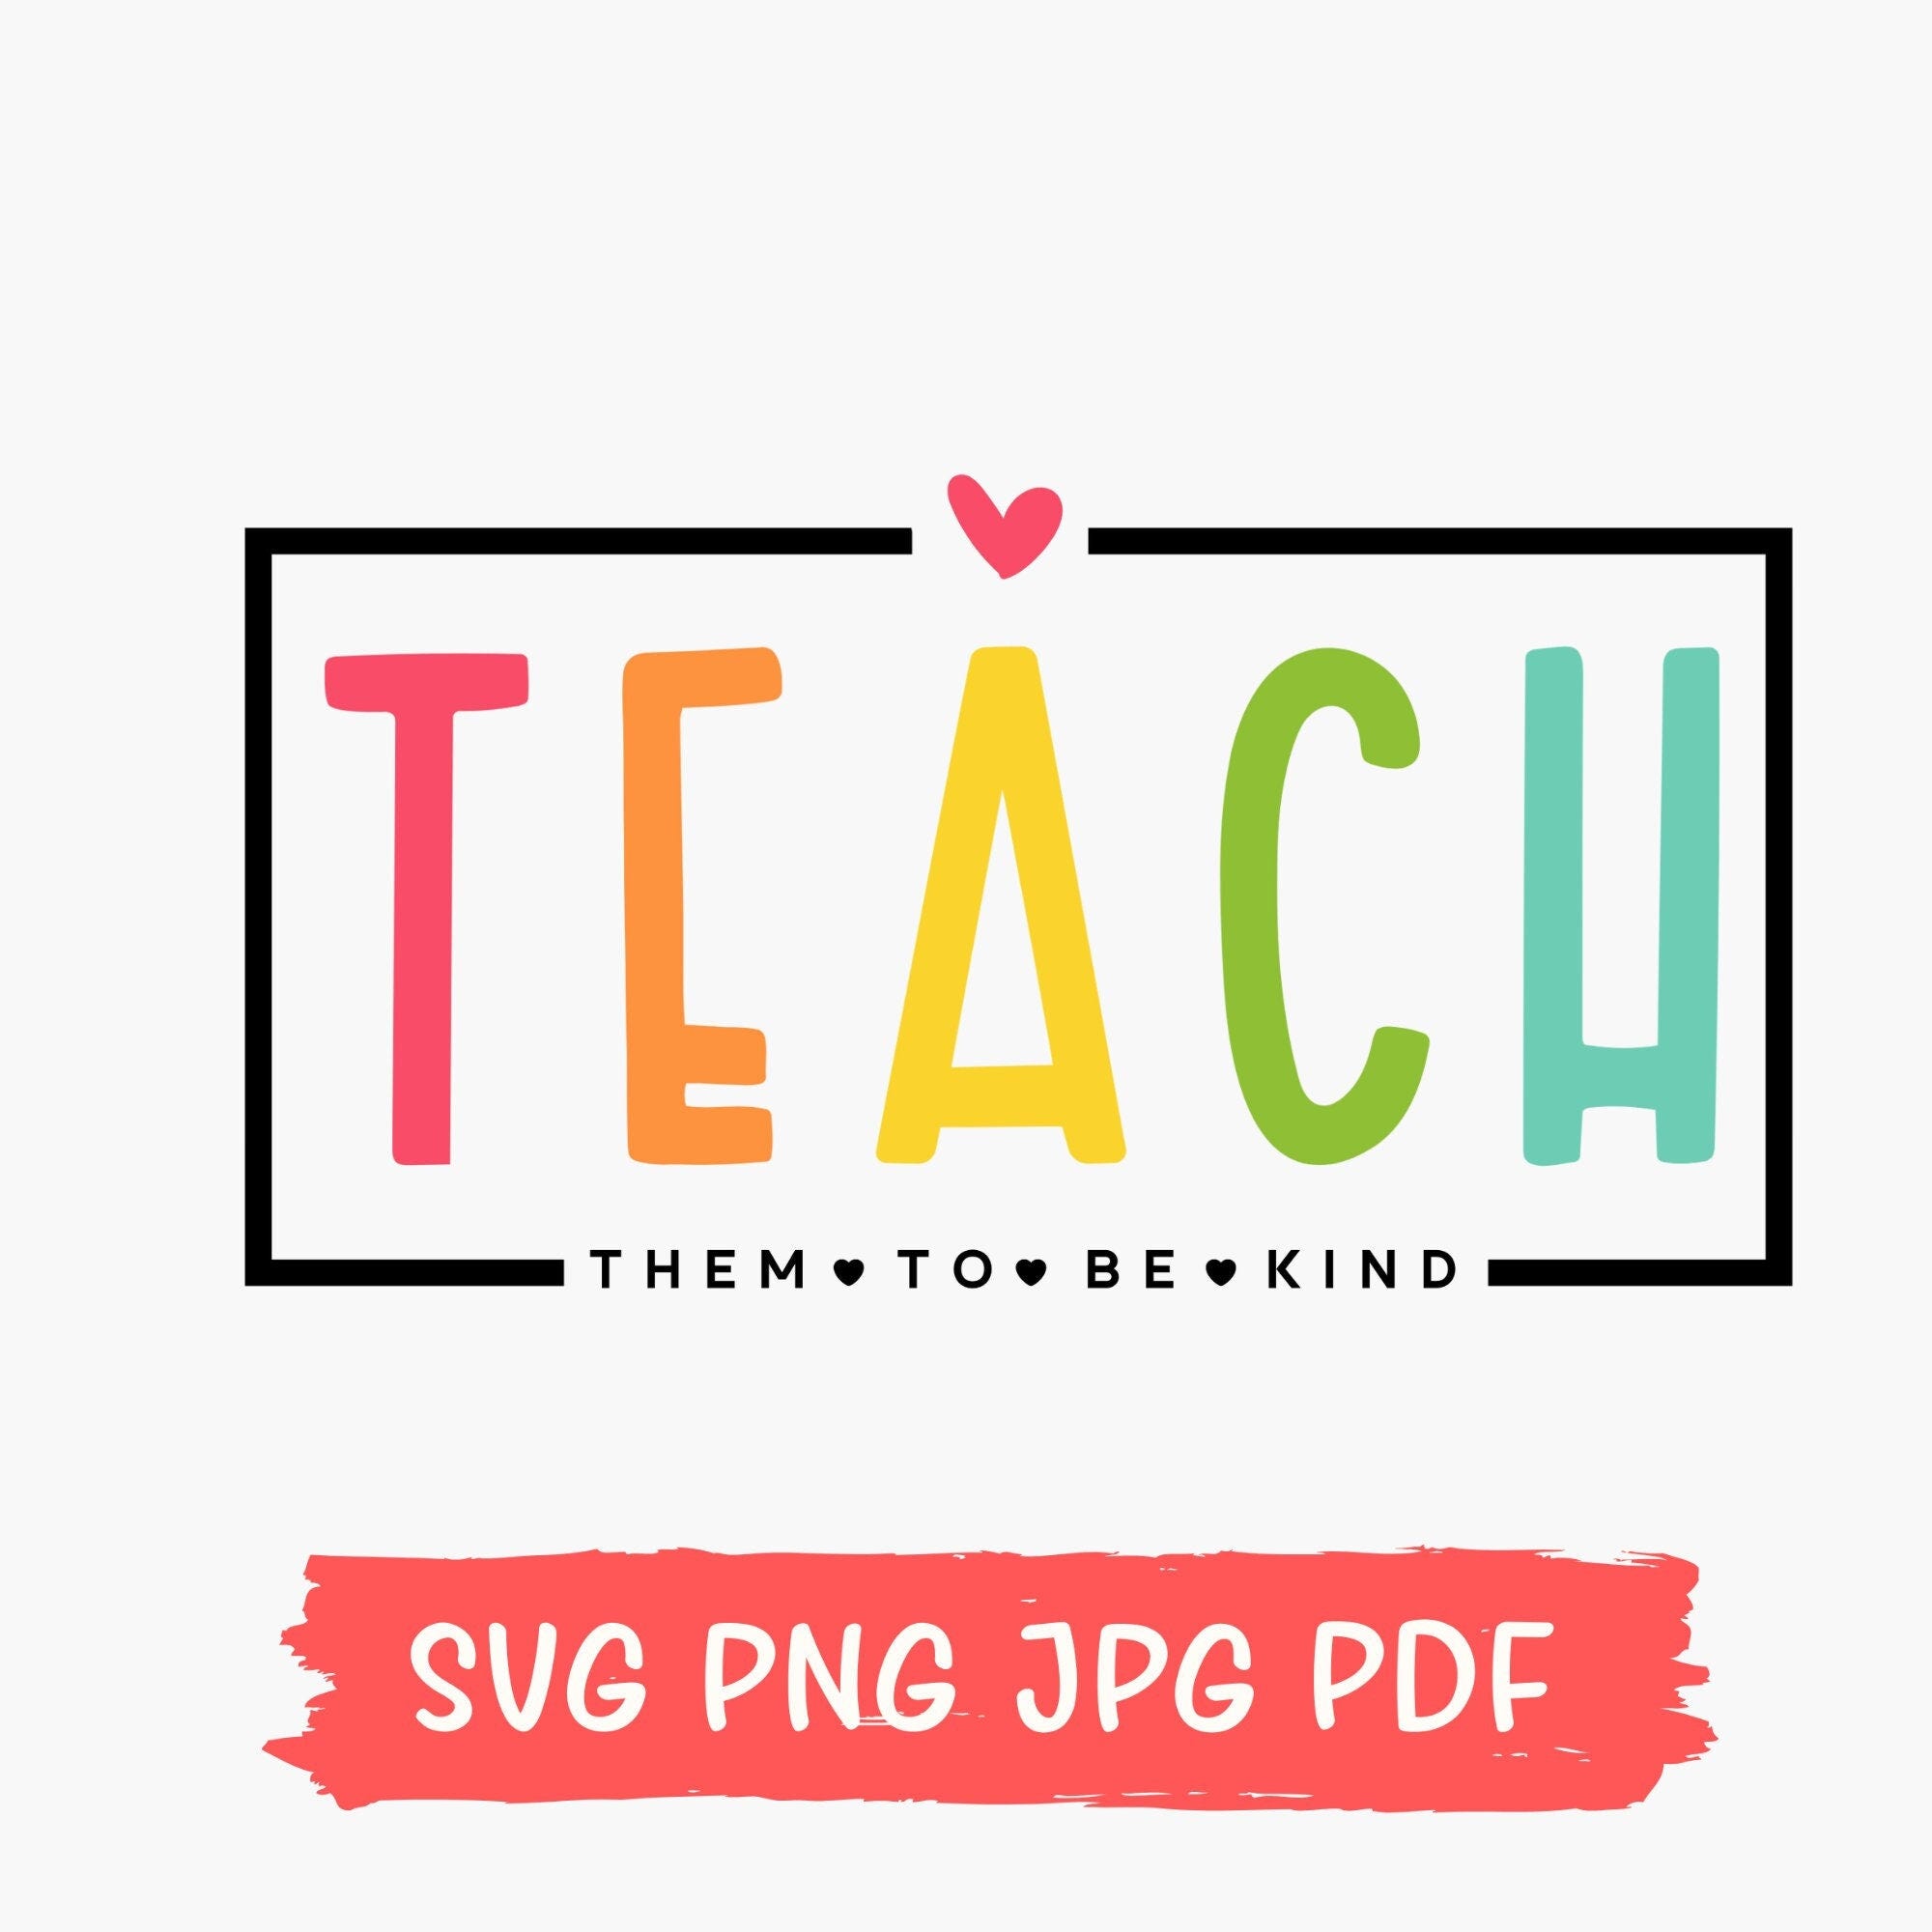 Teach Them To Be Kind Svg Png, Back to School Svg, Teacher Svg, Teacher Gift, Back To School Gift, Teacher Tee, Teacher Appreciation